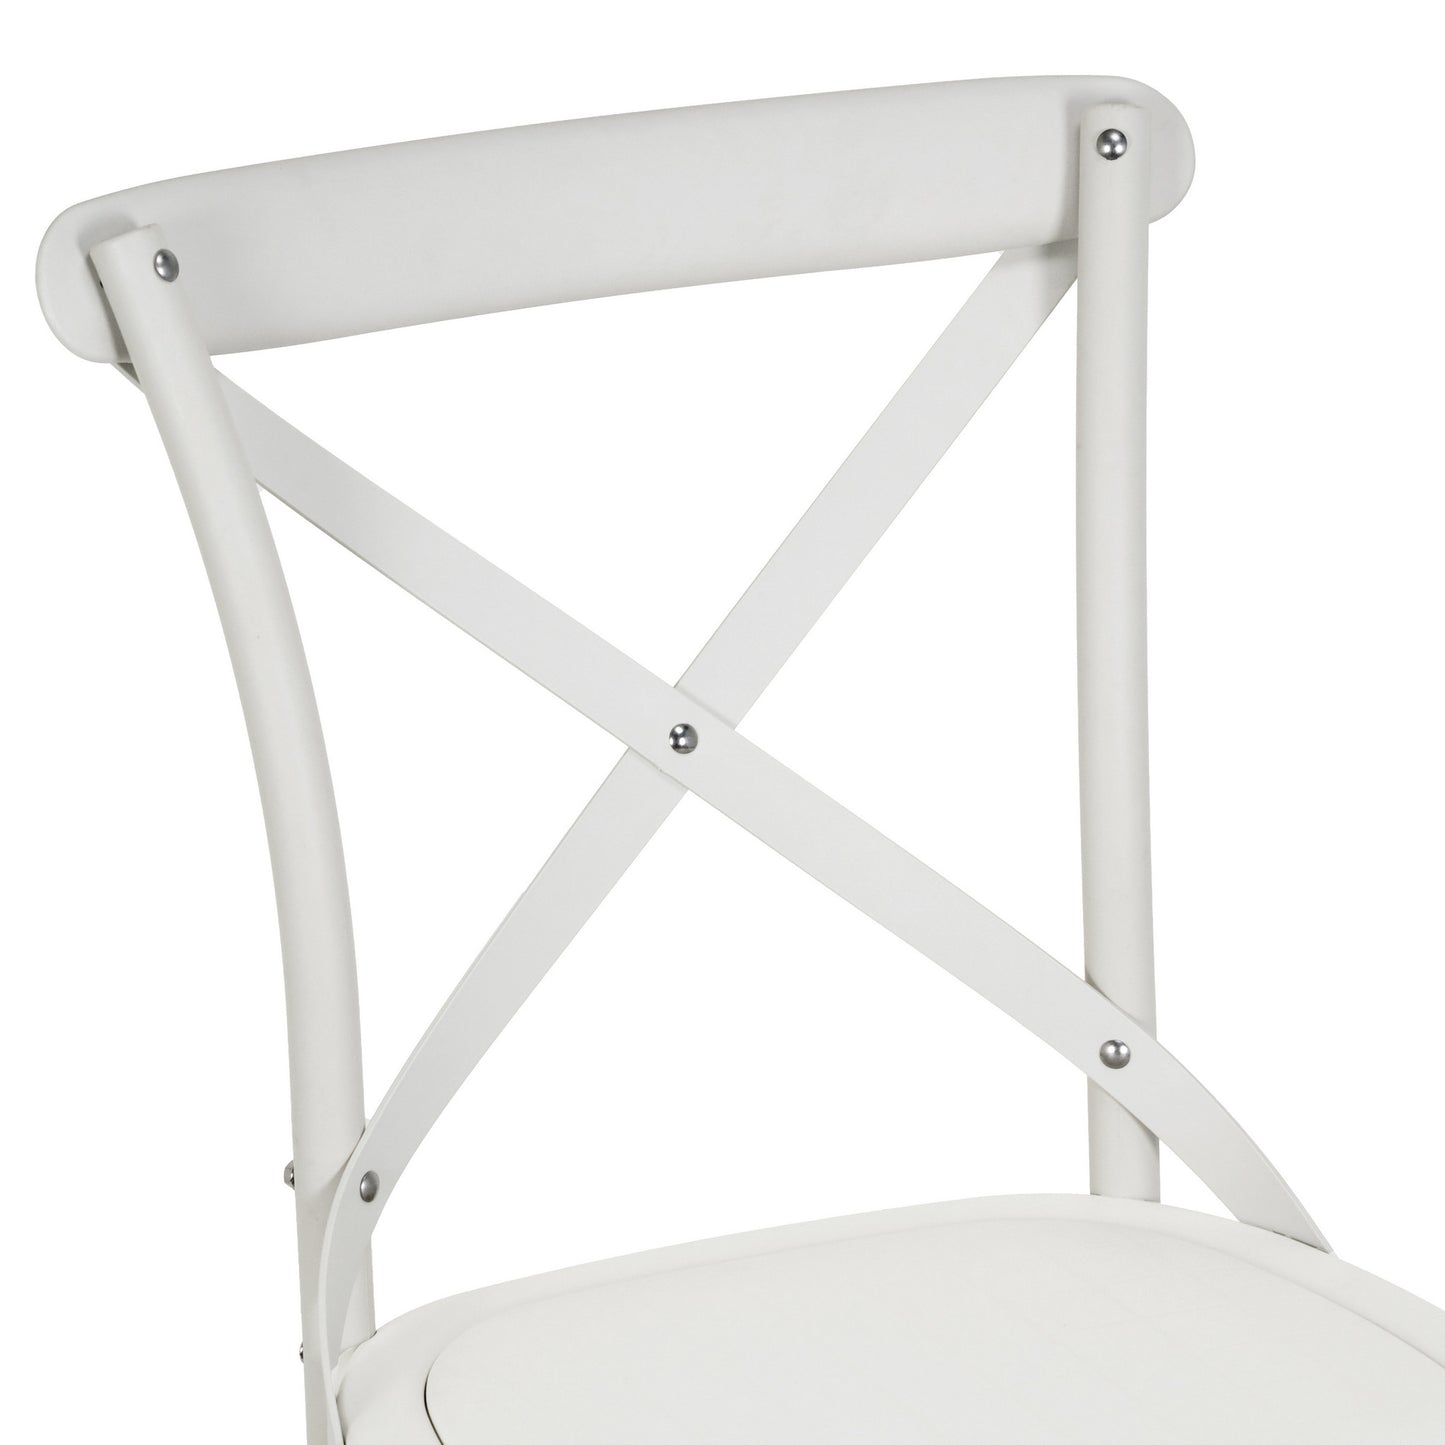 Set of 2 Aleah Outdoor Indoor Dining Chair Cross Back Chairs in White